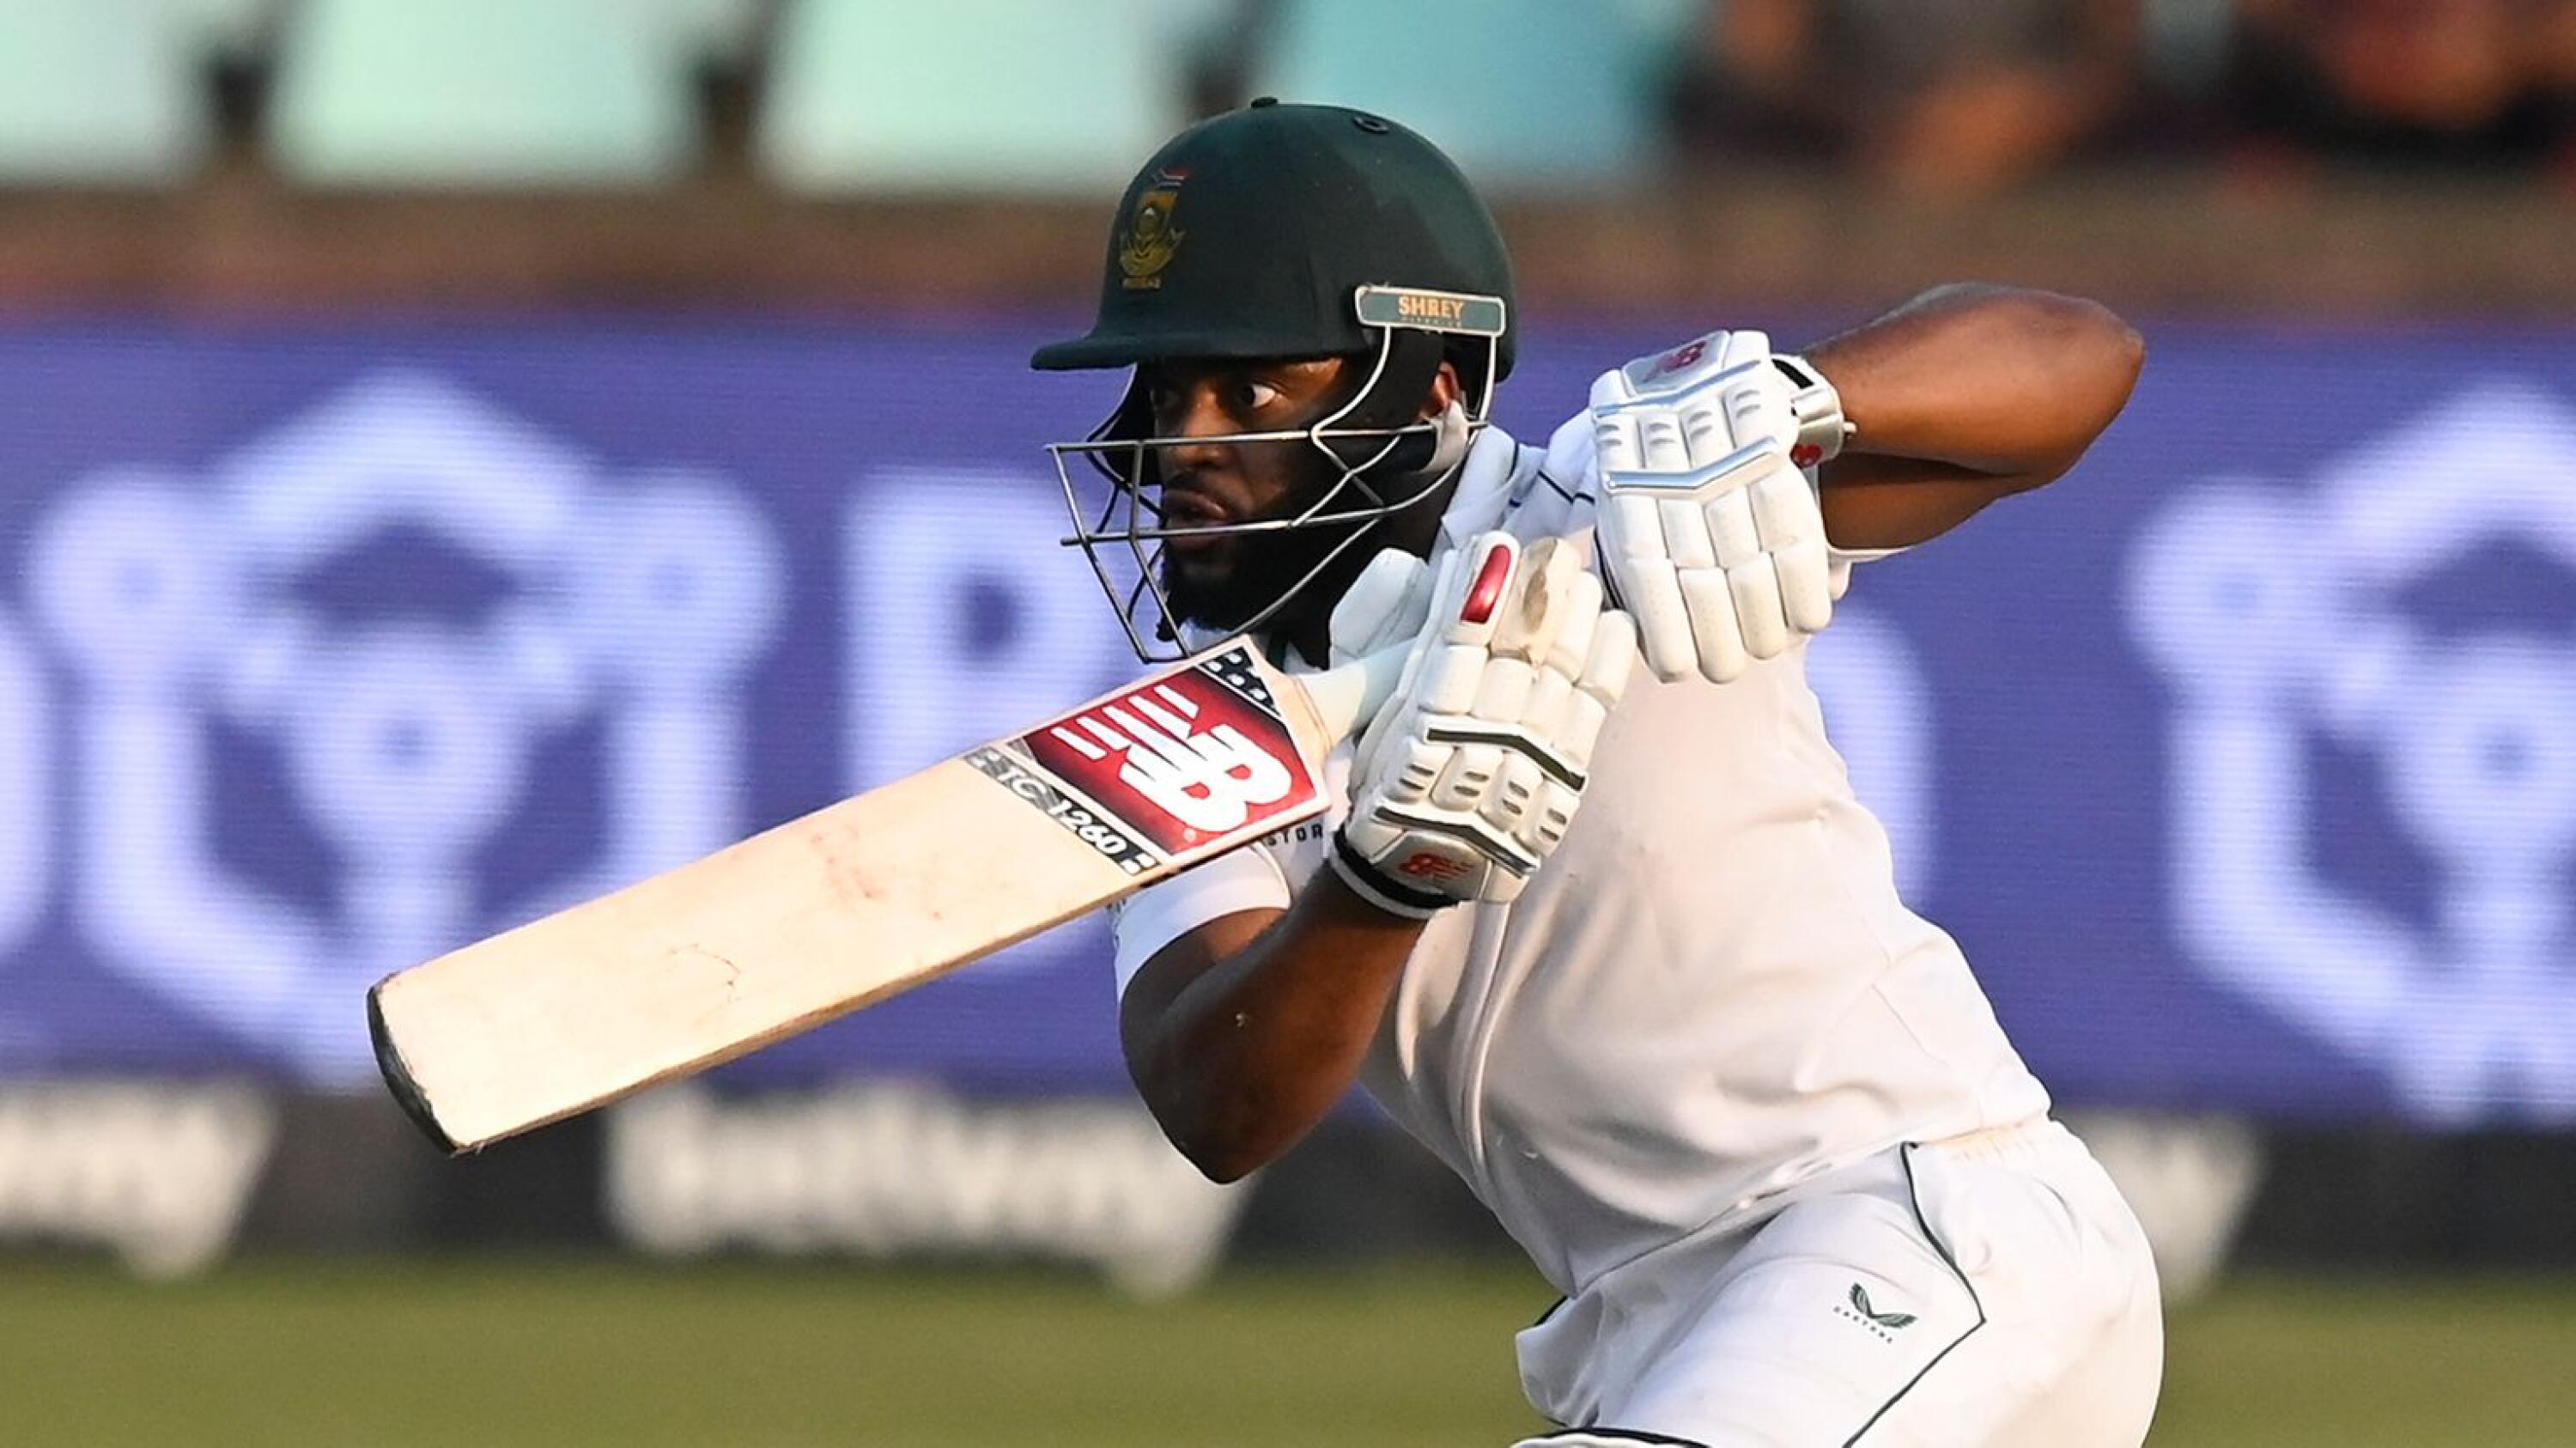 Proteas’ vice captain Temba Bavuma plays the ball during the first Test against Bangladesh at Kingsmead Stadium in Durban on Wednesday